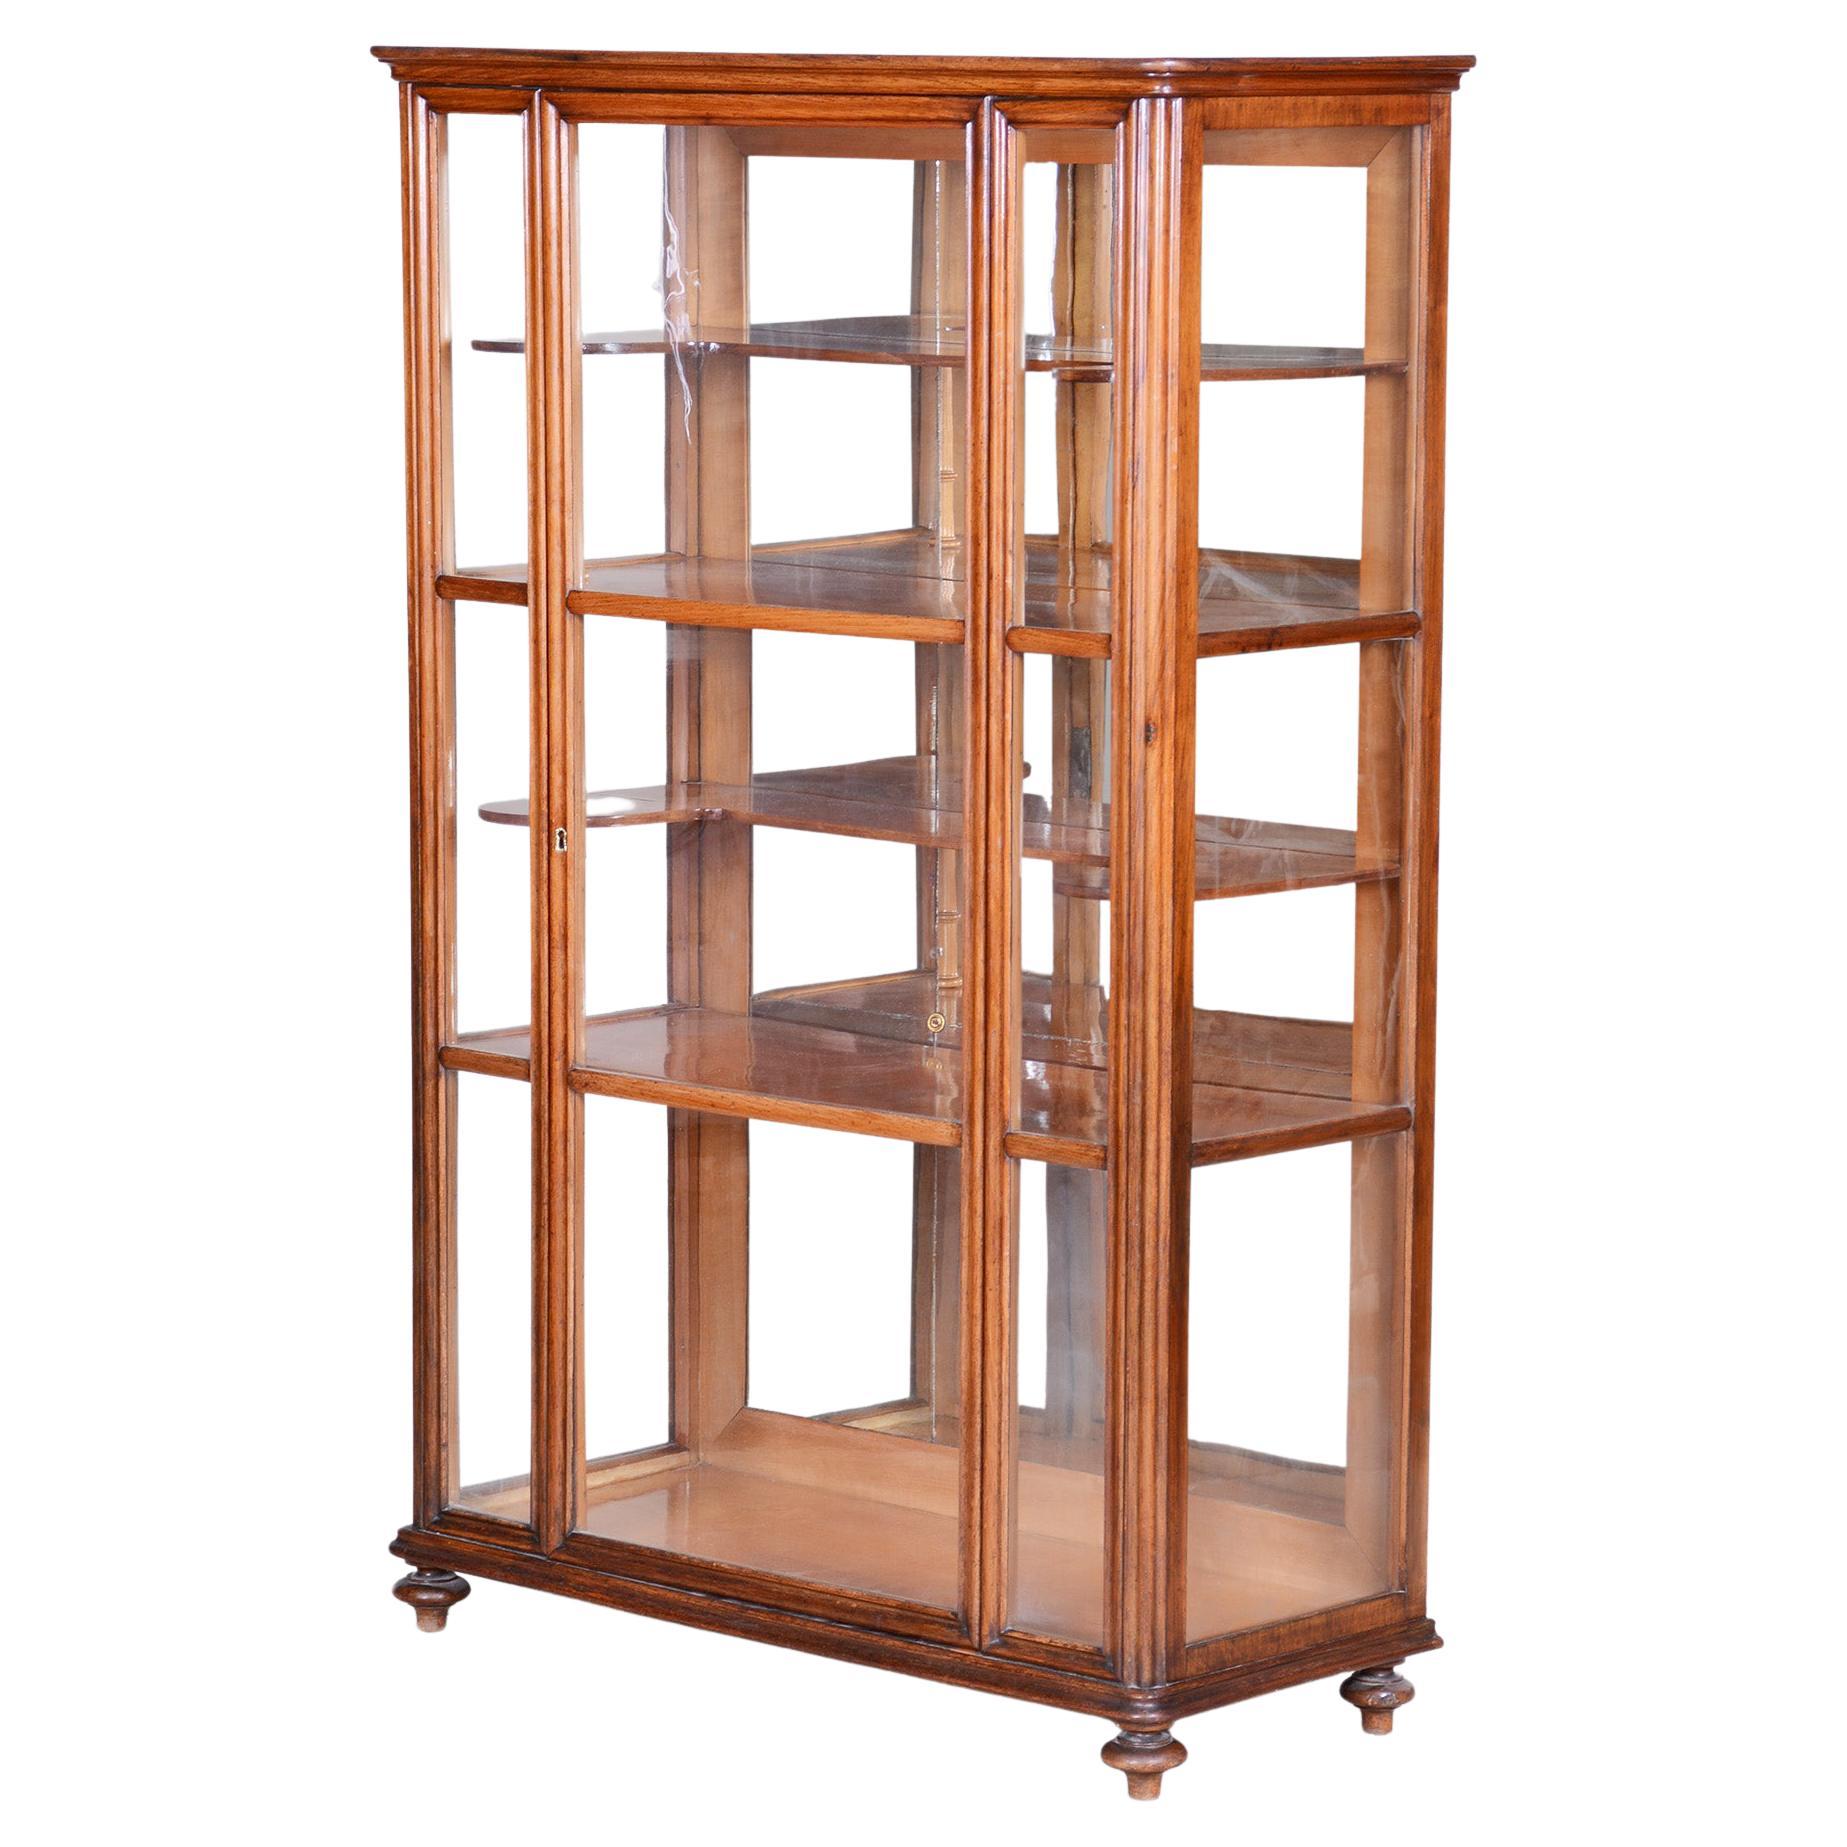 19th Century Display Cabinet Made in Bohemia, Fully Restored Walnut and Glass